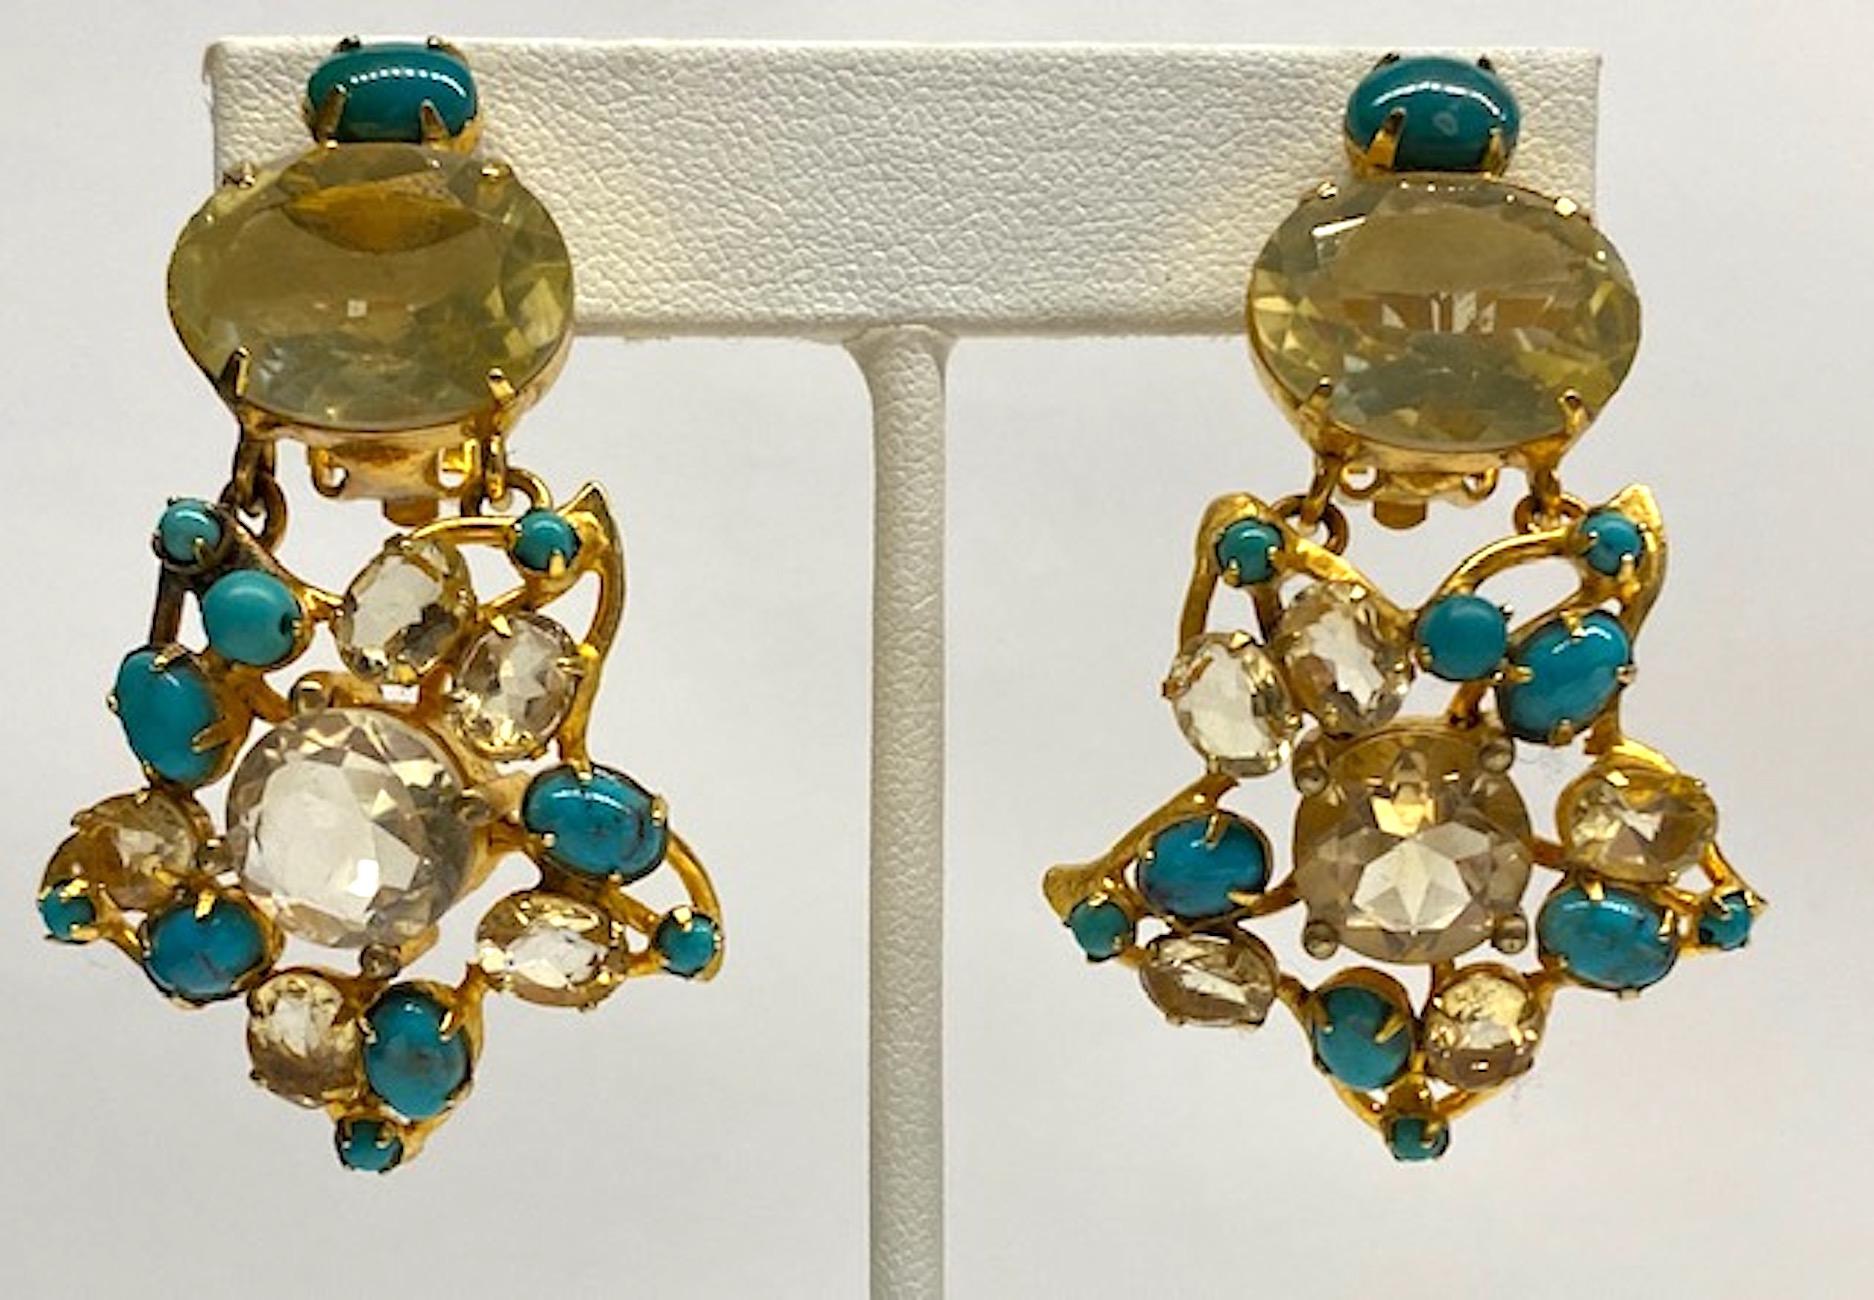 Lovely pair of Bounkit flower pendant earrings. Gold tone setting. Top of each earring has a turquoise cabochon sitting above a large 18 mm wide by 13 mm high oval lemon quartz and a clip backing inscribed Bounkit. Suspended from the top is a 1.38